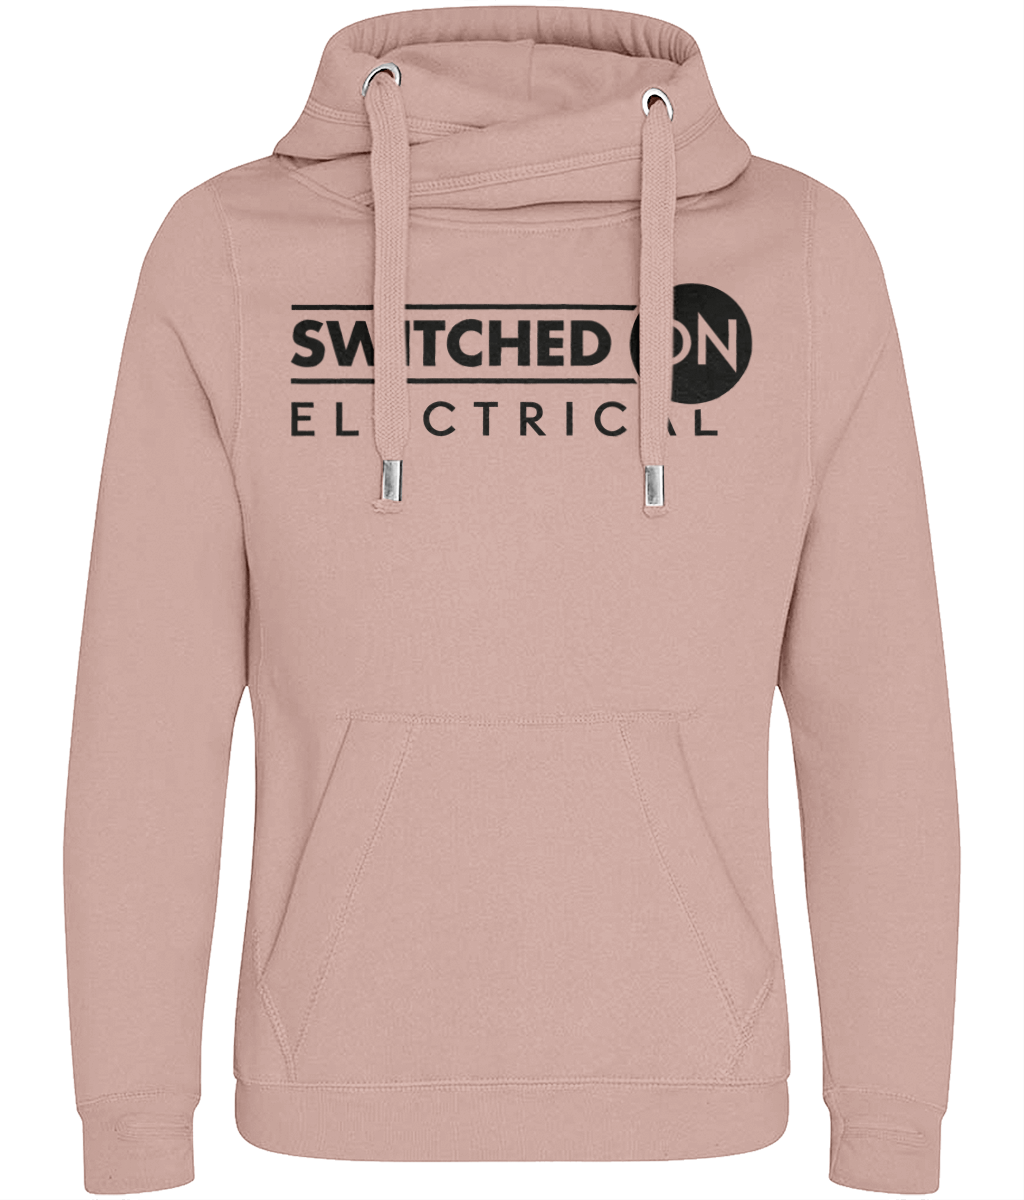 Switched On Electrical - Cross Neck Hoodie - Black Print